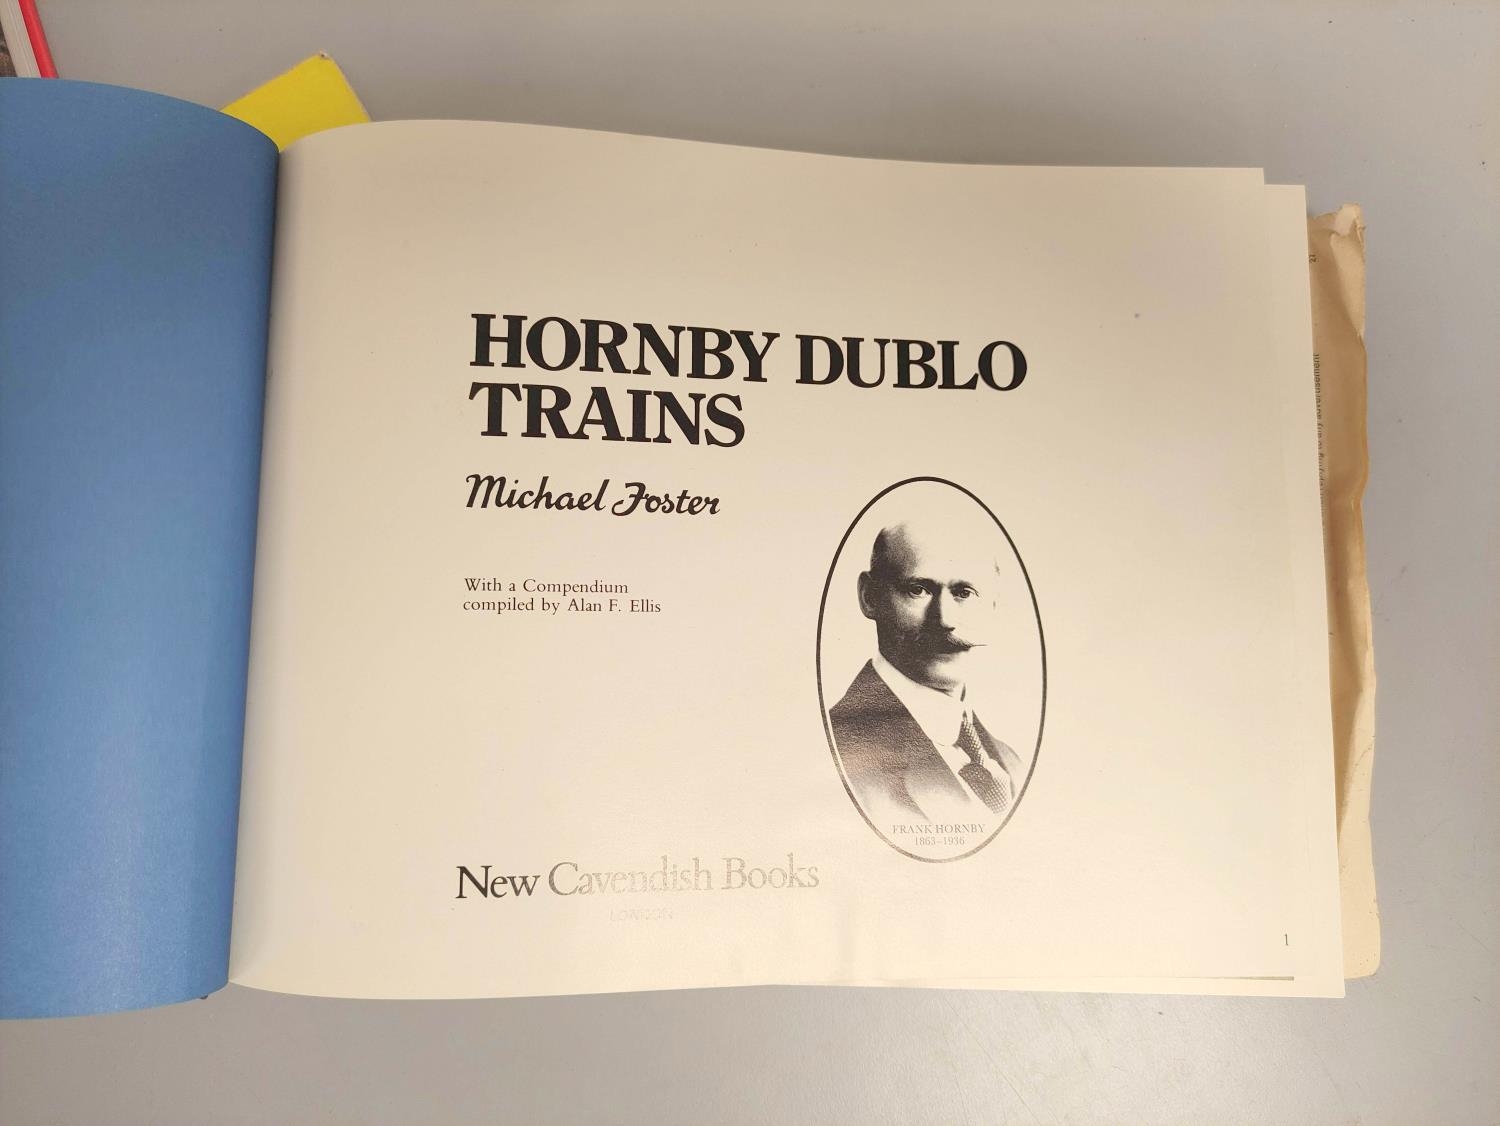 Model railway New Cavendish books to include M.Foster Hornby Dublo Trains, and Triang-Hornby The - Image 4 of 6